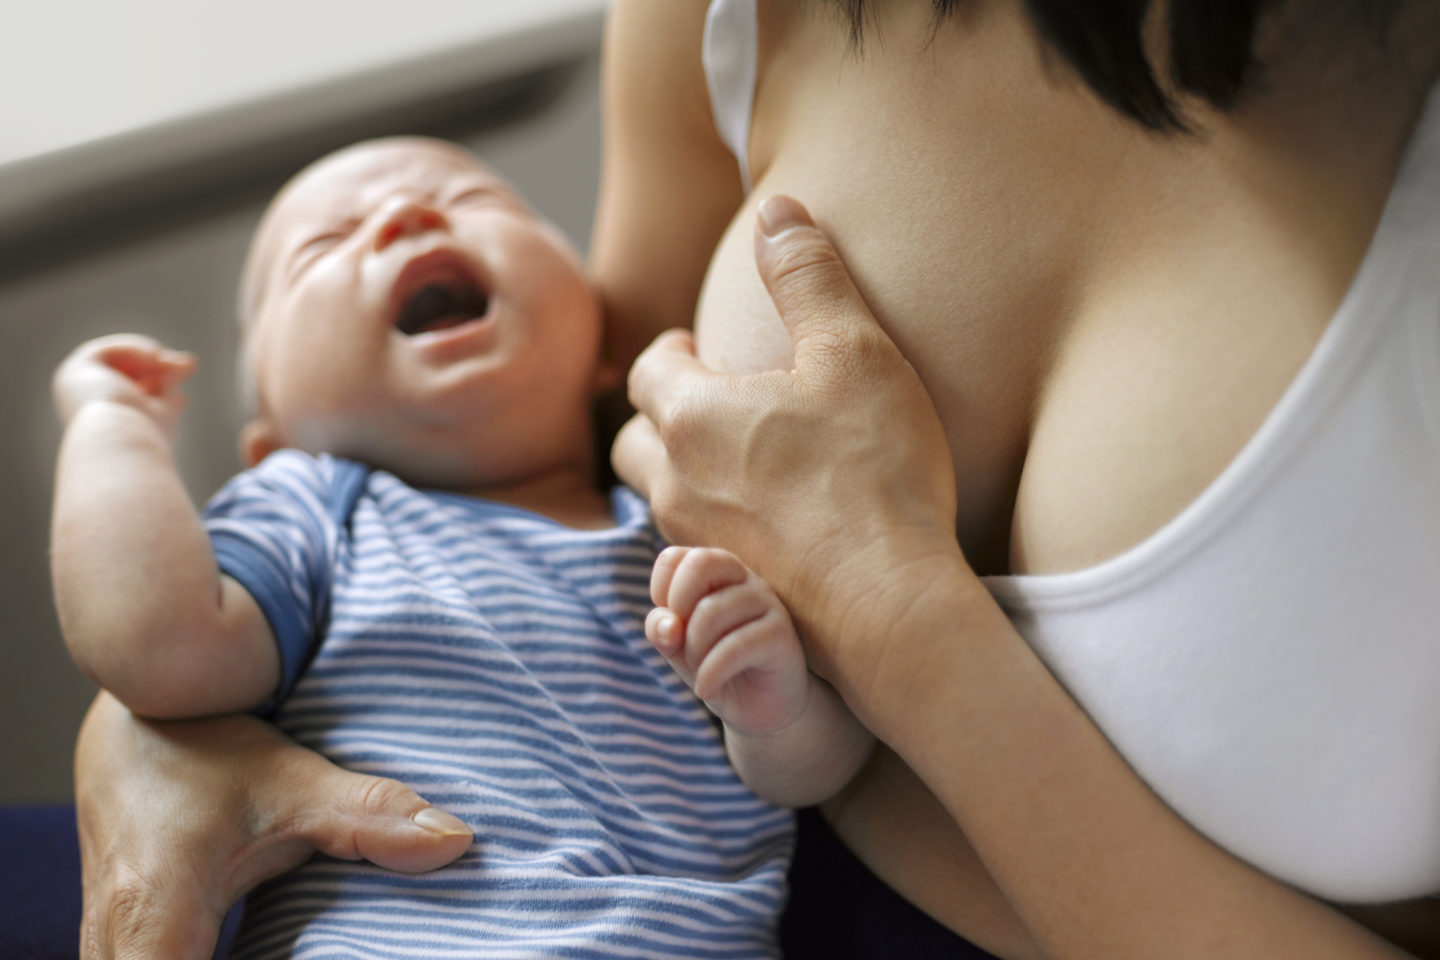 Breastfeeding Moms: Here’s What You Need to Know About Mastitis